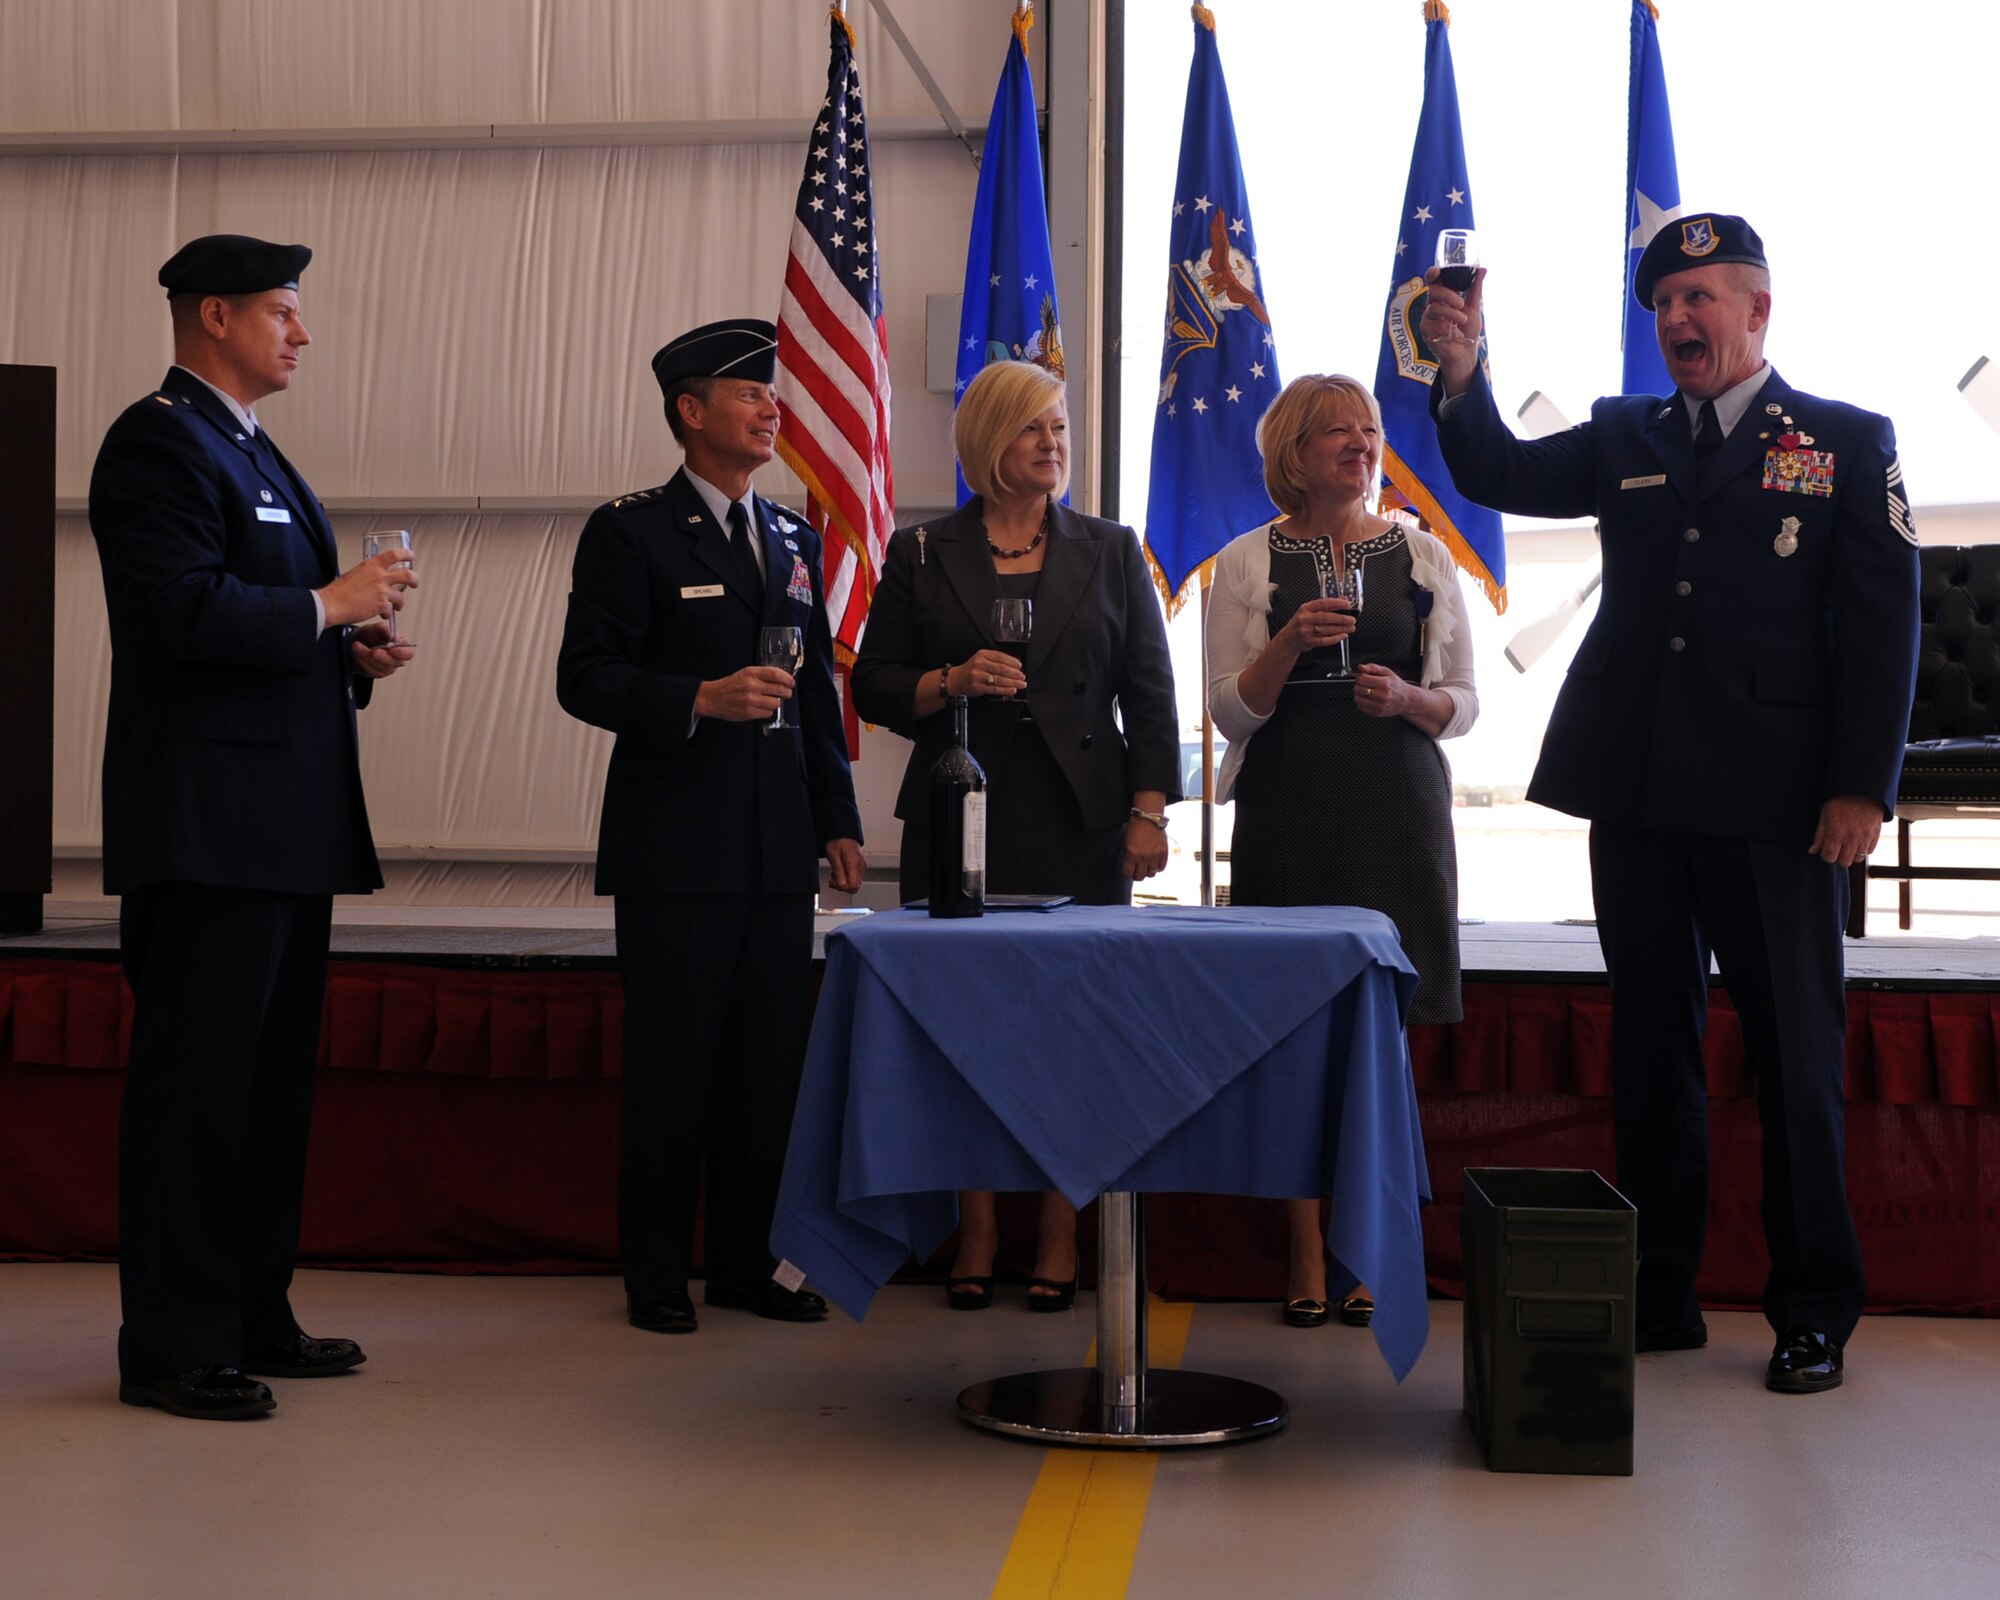 U.S. Air Force Chief Master Sgt. Harold Clark, 12th Air Force (Air Forces Southern), command chief, makes a ceremonial toast during his retirement ceremony on Davis-Monthan Air Force Base, Ariz., Nov. 18, 2011. (U.S. Air Force photo by Airman 1st Class Christine Griffiths/Released)